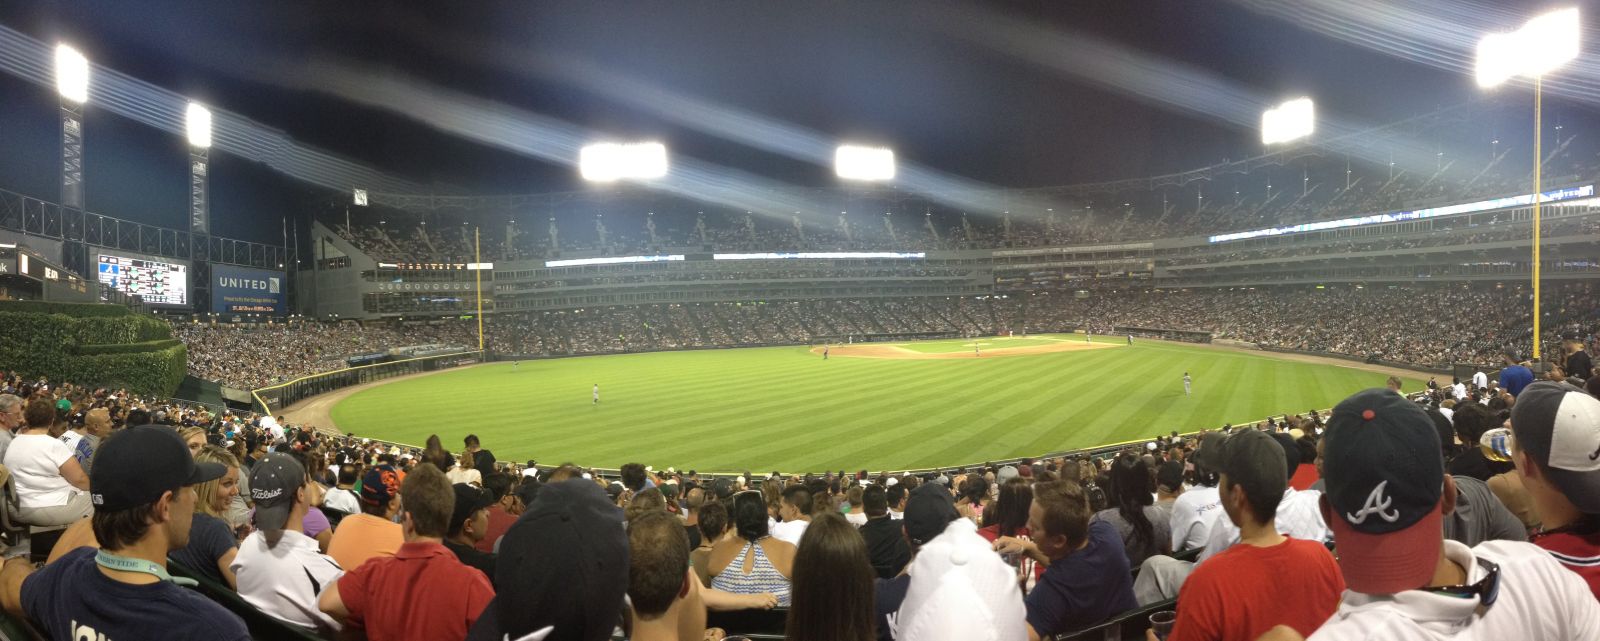 section 161, row 21 seat view  - guaranteed rate field